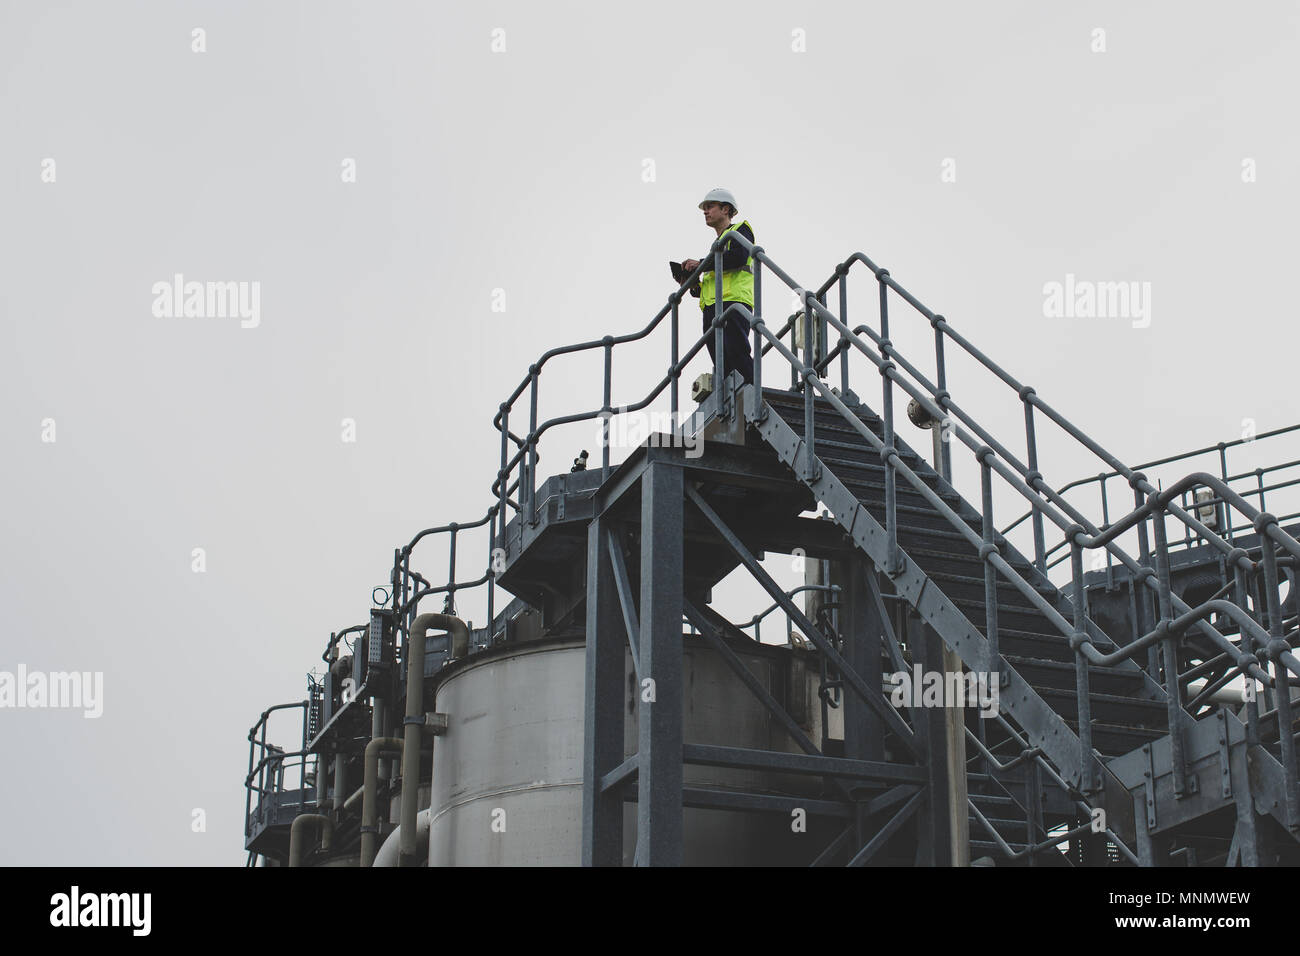 Industrial worker using a digital tablet on site Stock Photo